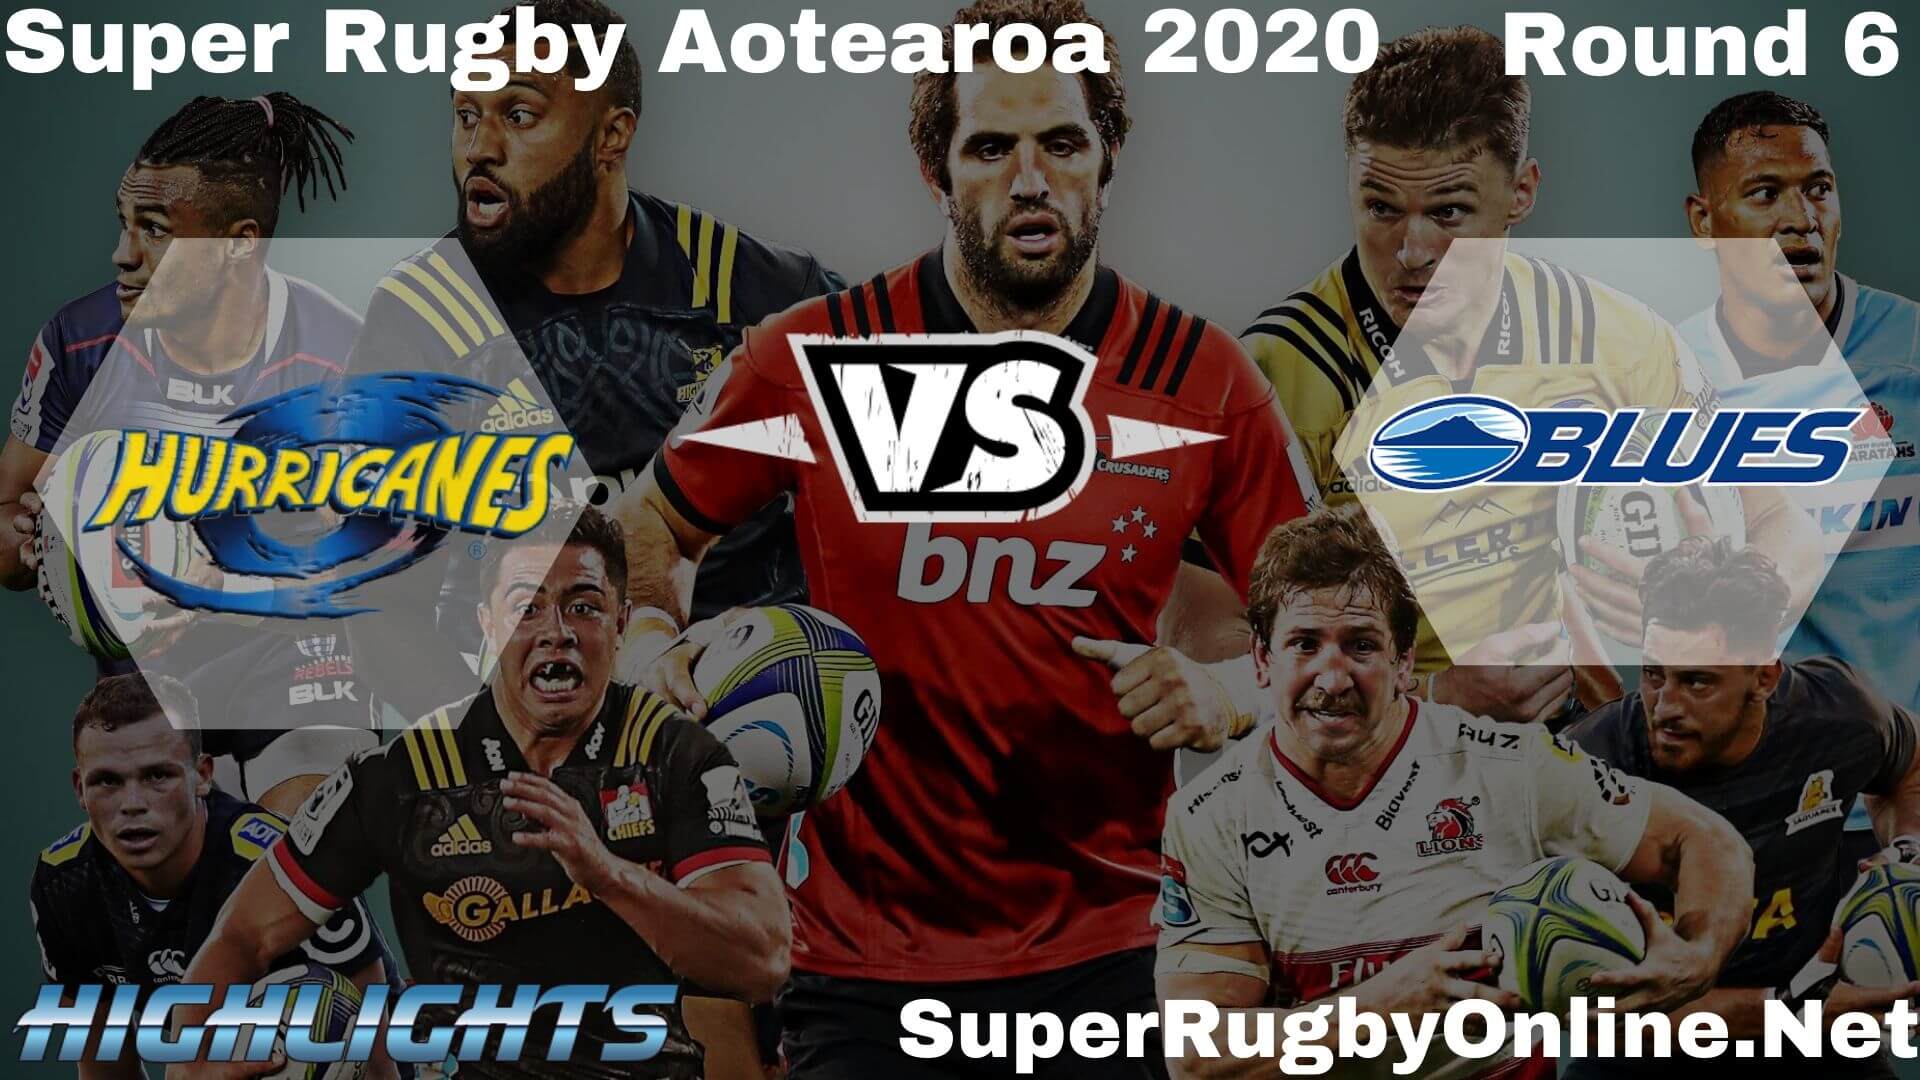 Hurricanes Vs Blues Rd 6 Highlights 2020 Super Rugby Aotearao